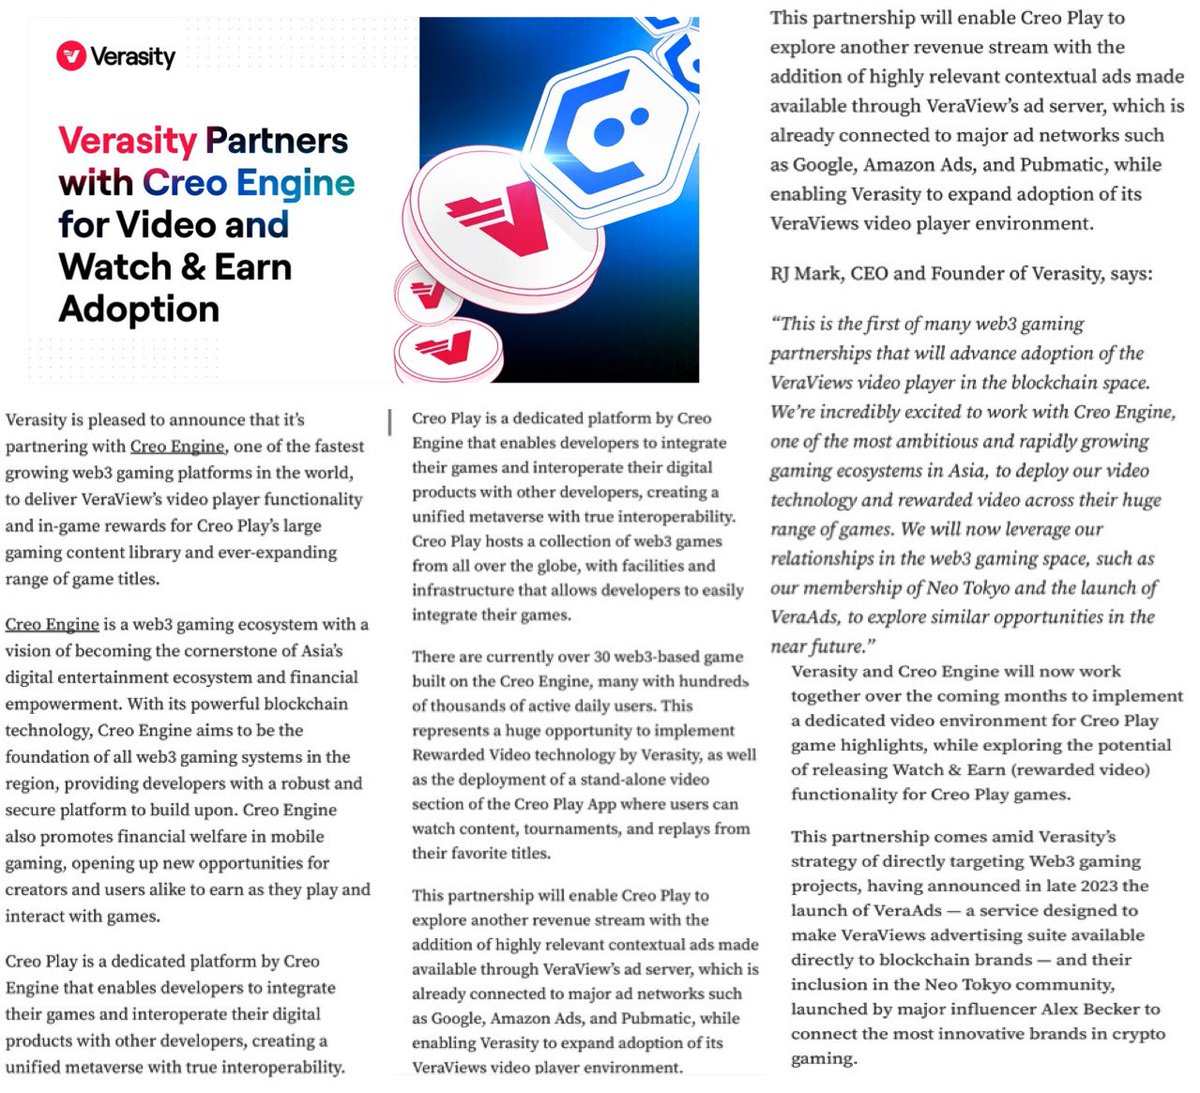 $VRA X $CREO 🤝 #Verasity partner w #CREOENGINE for Video & Watch & earn adoption. “Verasity & Creo will now work together over the coming months to implement a dedicated video environment for Creo Play game highlights, while exploring the potential of releasing Watch & Earn…